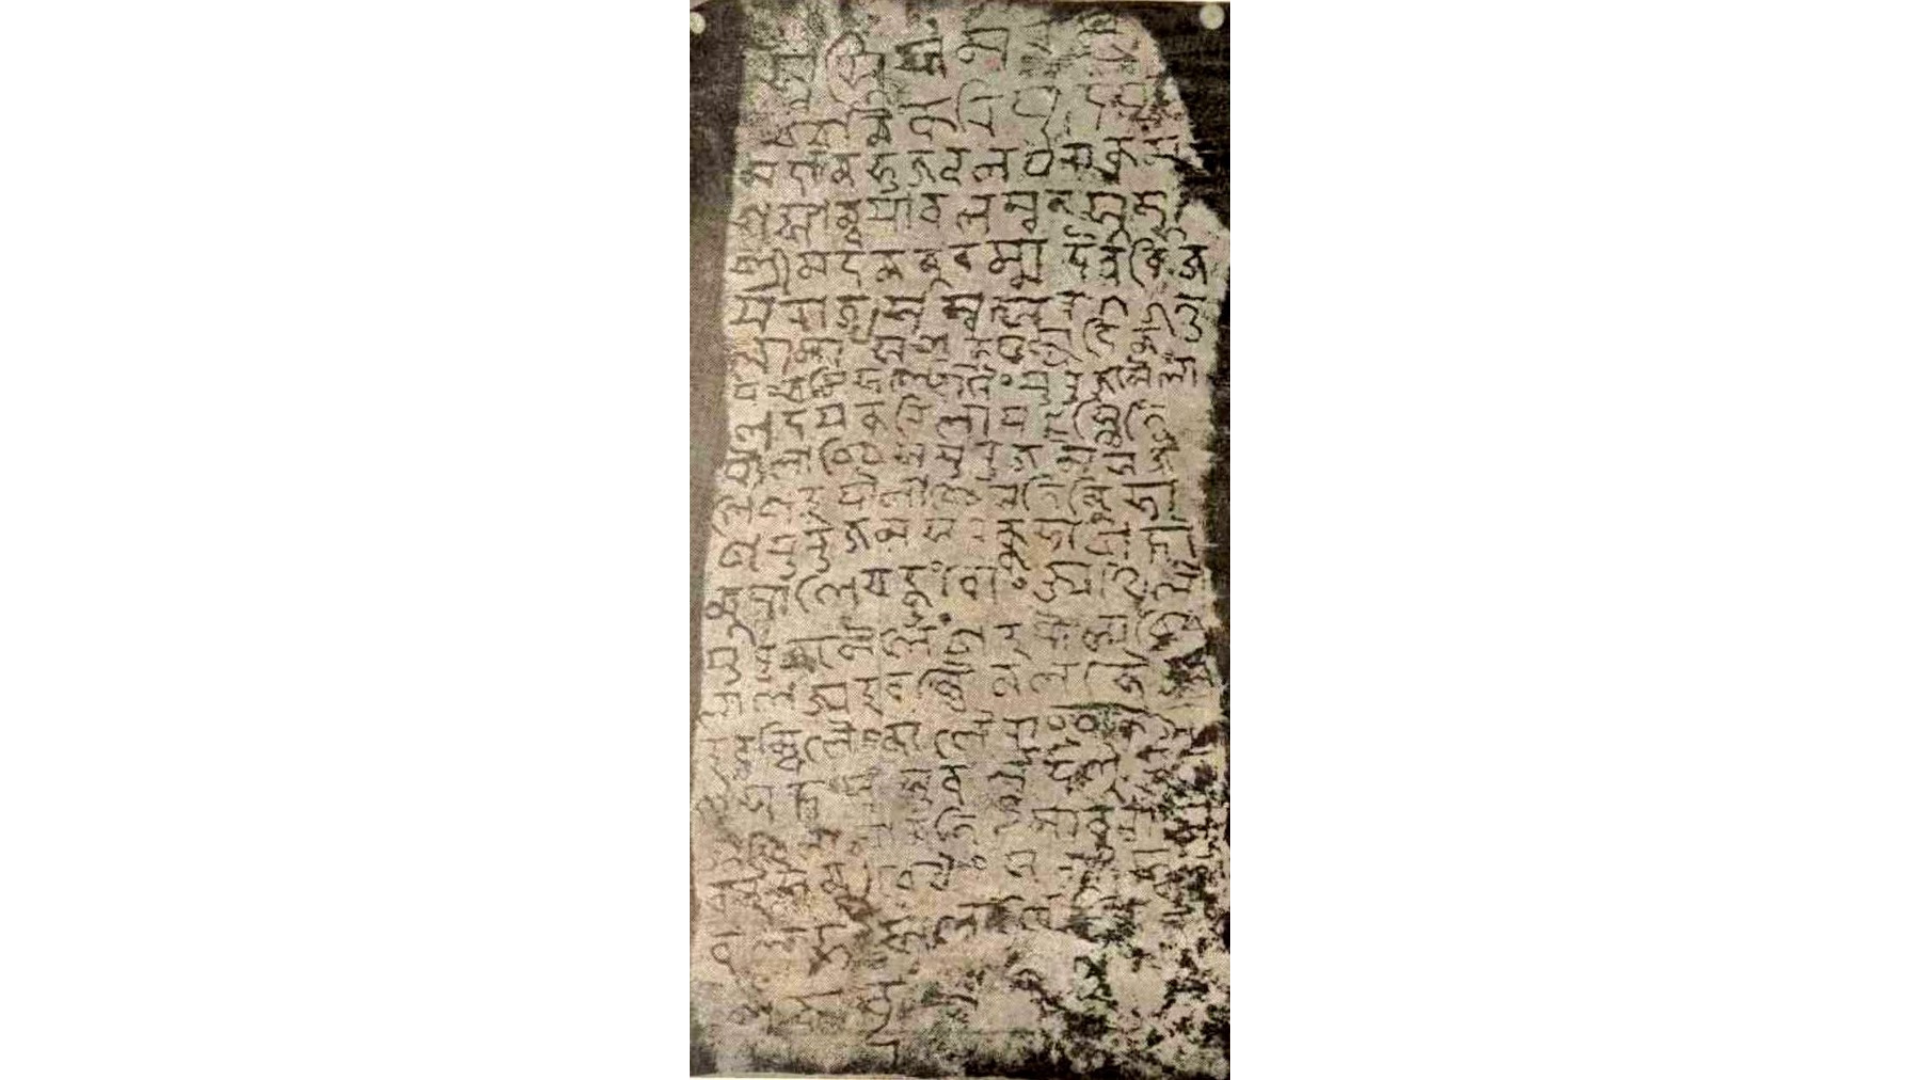 Urajam Inscription in Old Odia (Royal charter of Eastern Ganga dynasty from 1051 CE)